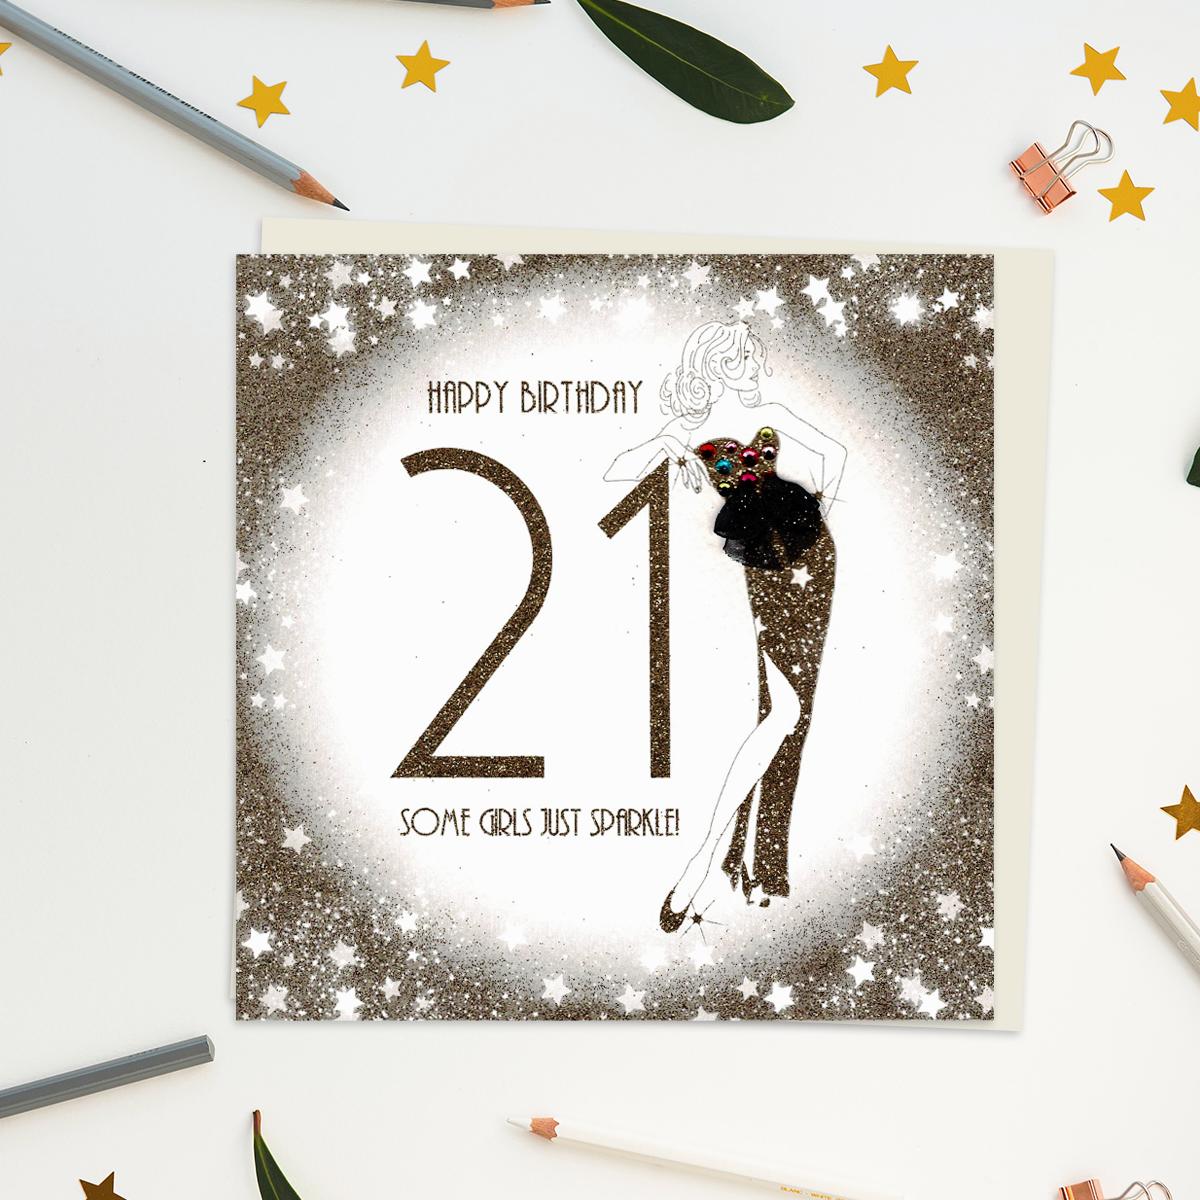 A Luxury Handcrafted Design From Five Dollar Shake Showing A Woman Leaning On The Number 21. Made From Embossed Card With Gold Glitter Accents, Gem Embellishments And Additional Attachments. Blank Inside For Your Own Message. Complete With Ivory Envelope